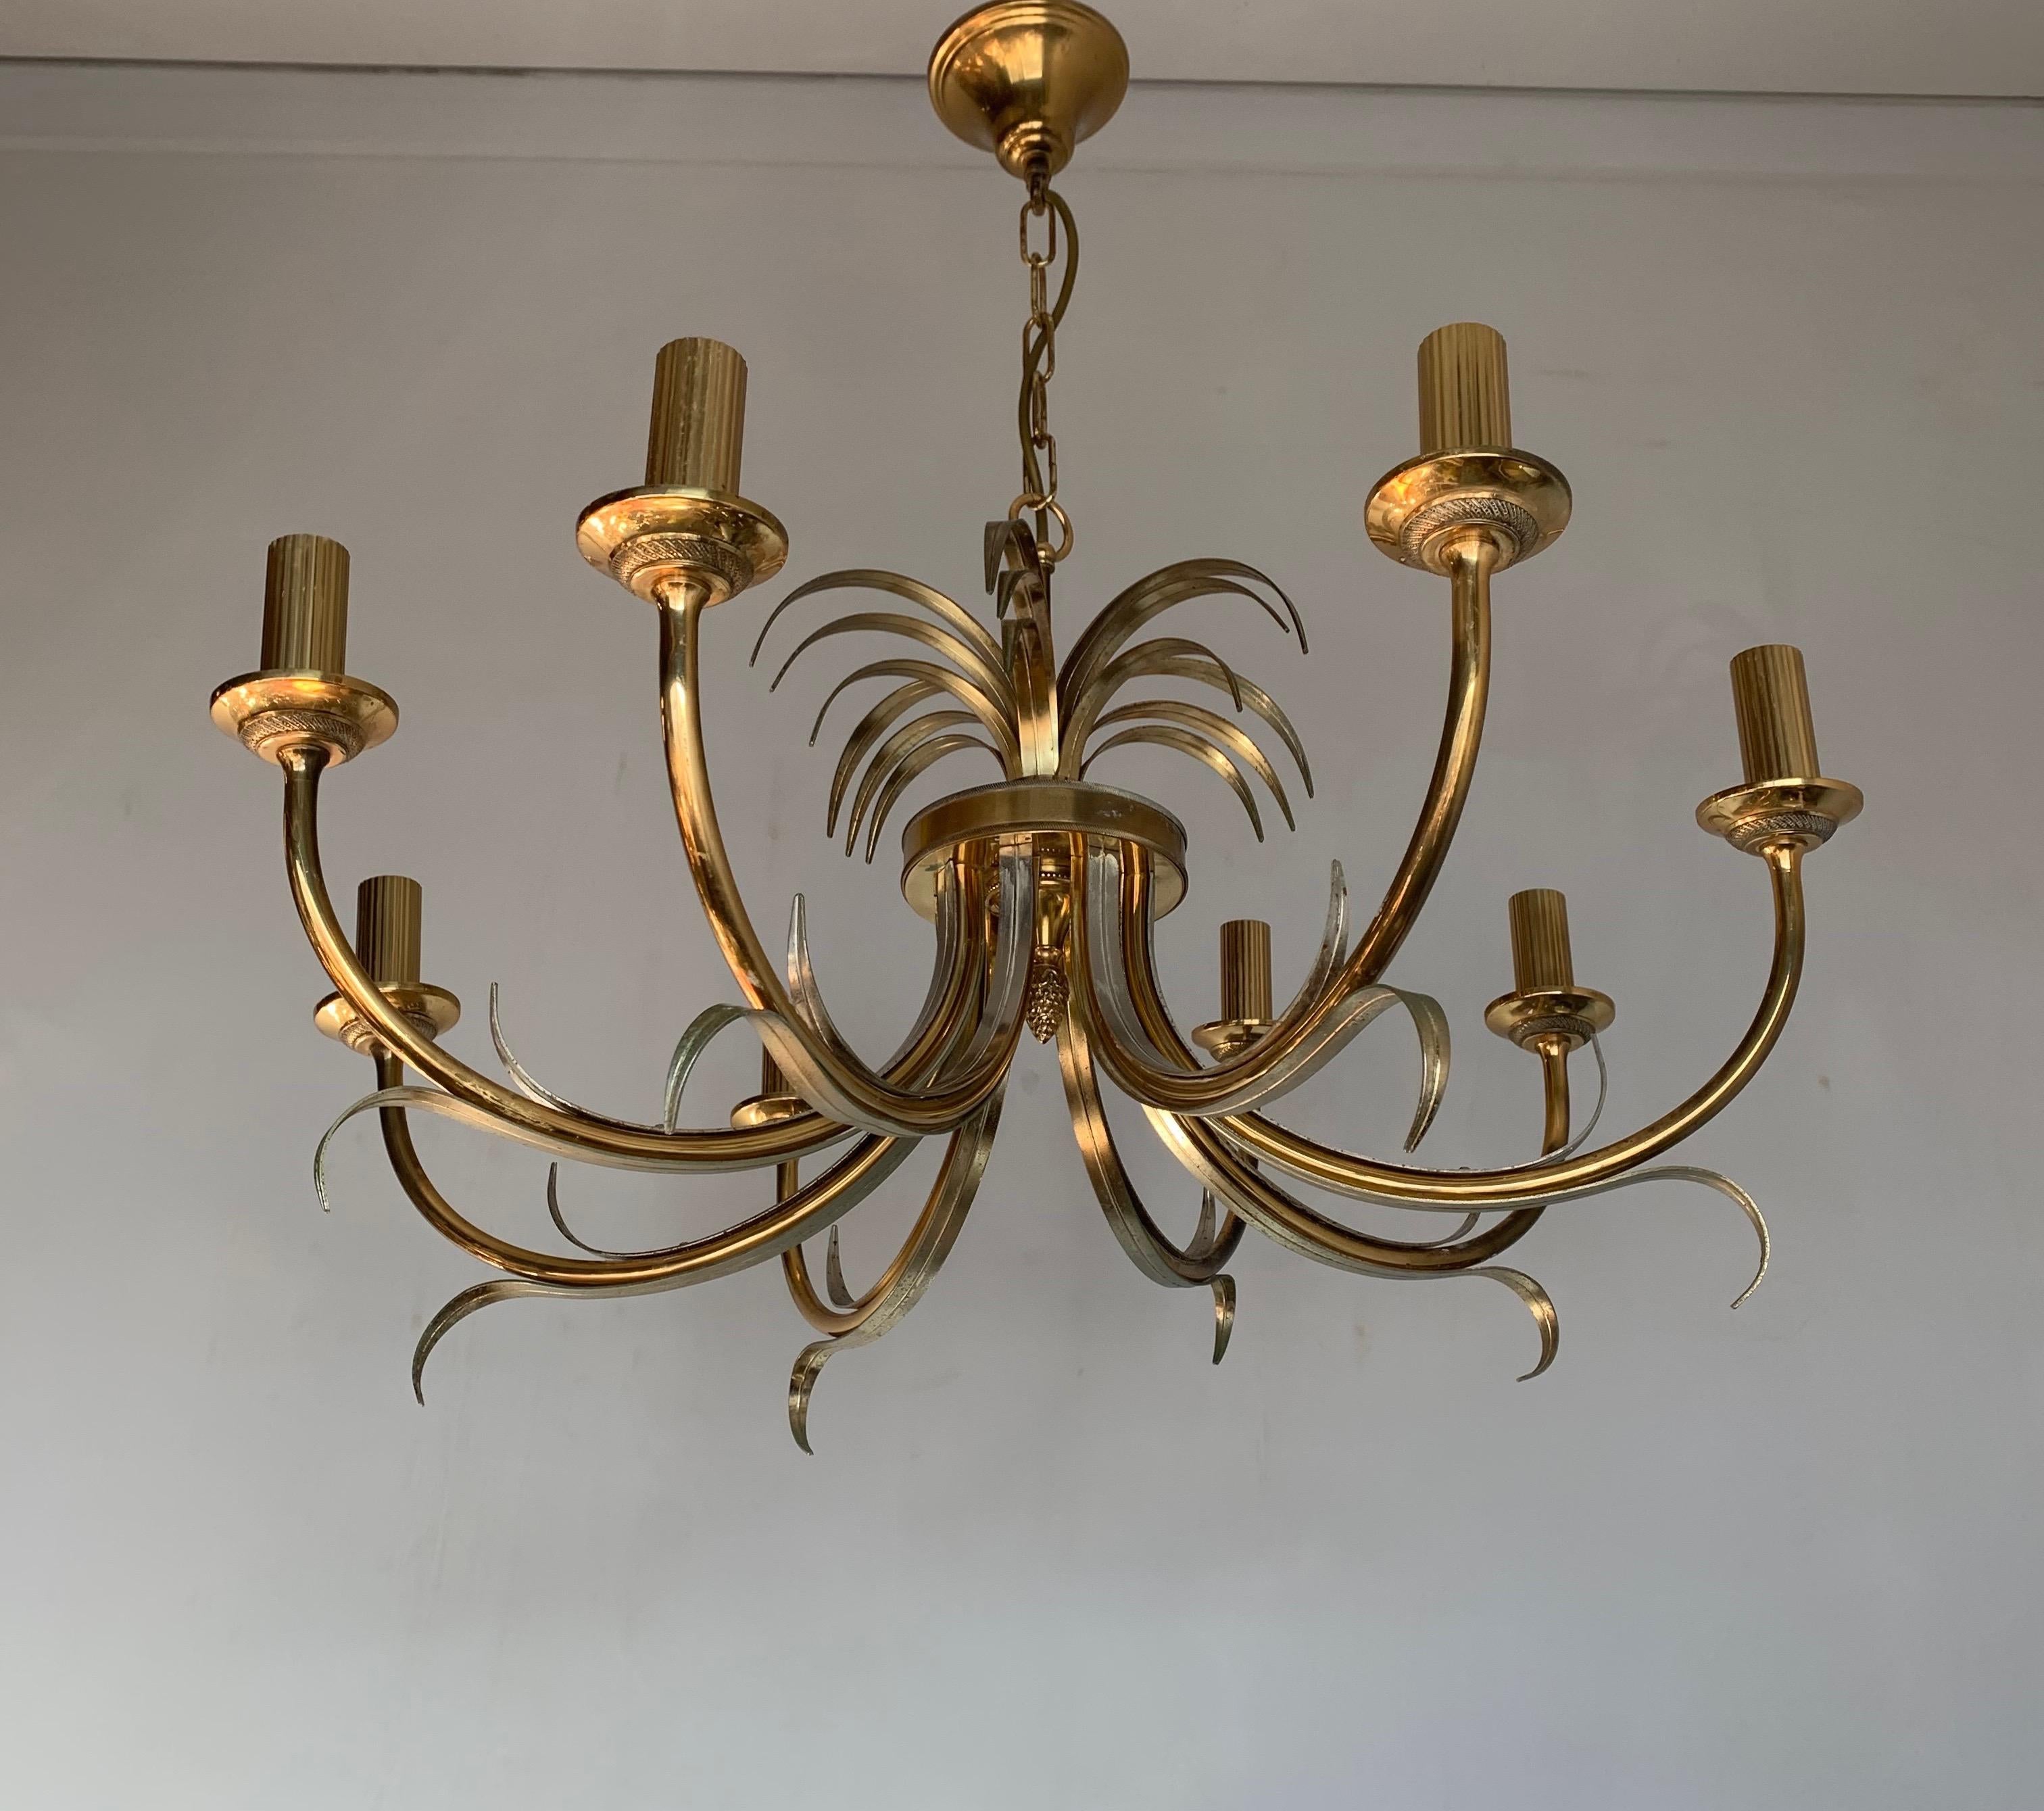 European Large Midcentury Made Matching Pair of Hollywood Regency Leaf Design Chandeliers For Sale